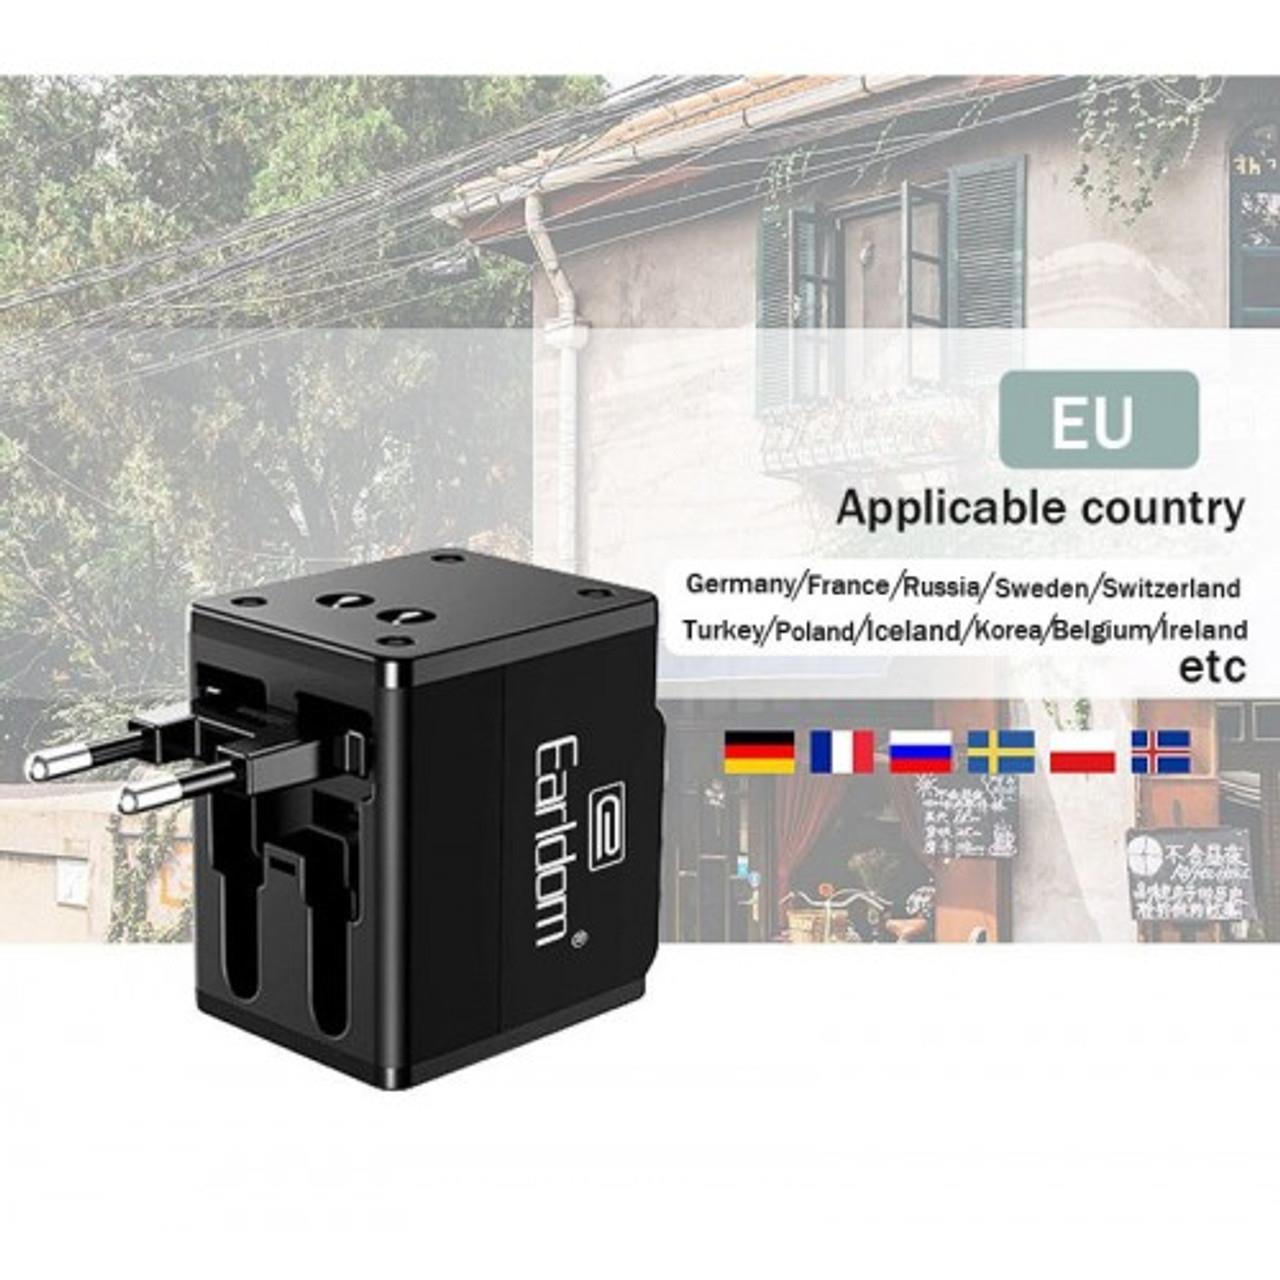 Earldom Universal Travel Adapter With Dual Usb Charging Ports